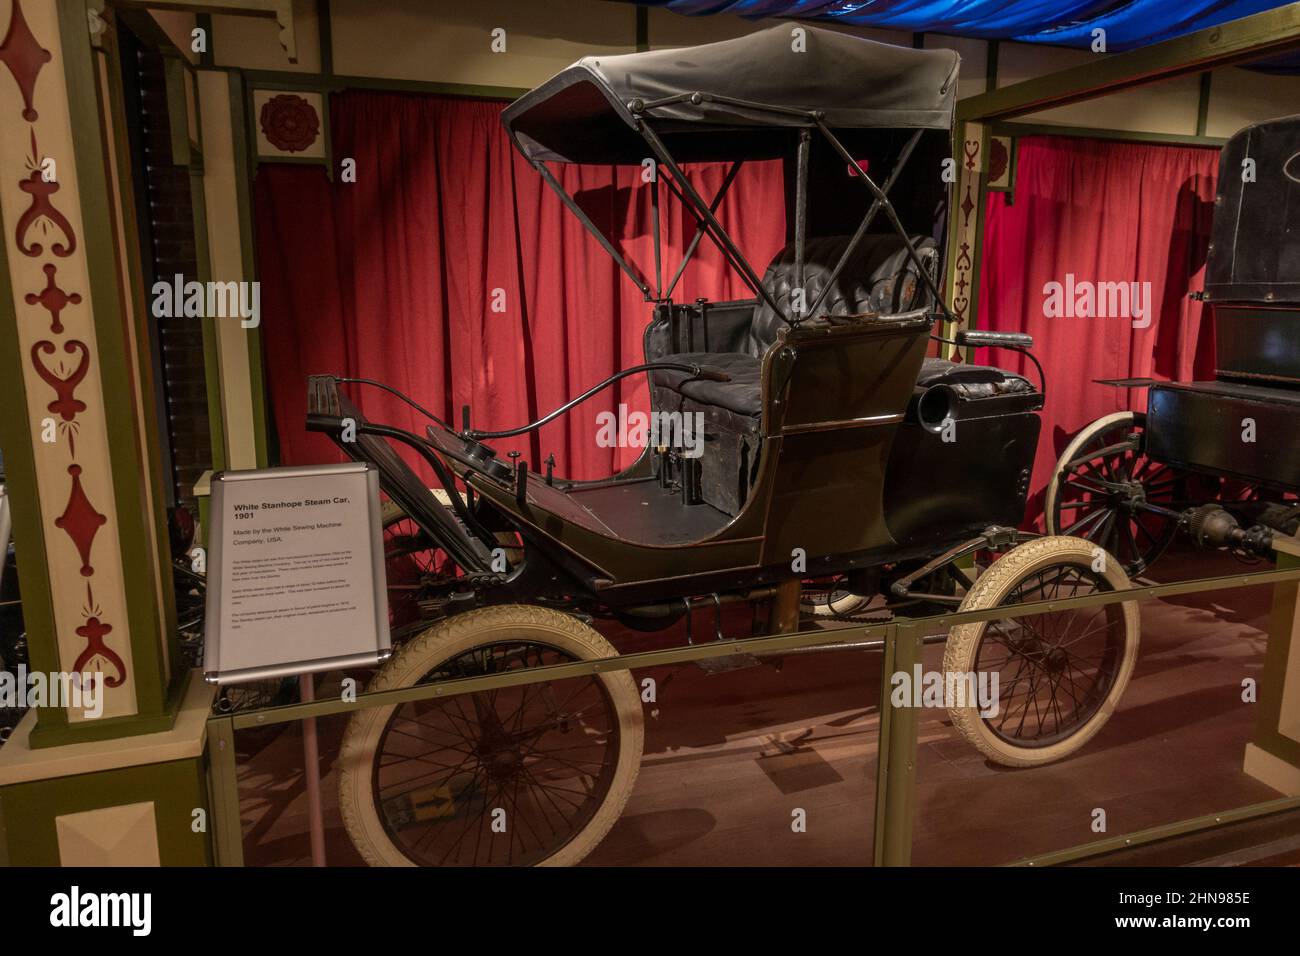 A White Stanhope Steam Car (c.1901) made by White Sewing Machine Co., Streetlife Museum, Kingston Upon Hull, East Riding of Yorkshire, UK. Stock Photo